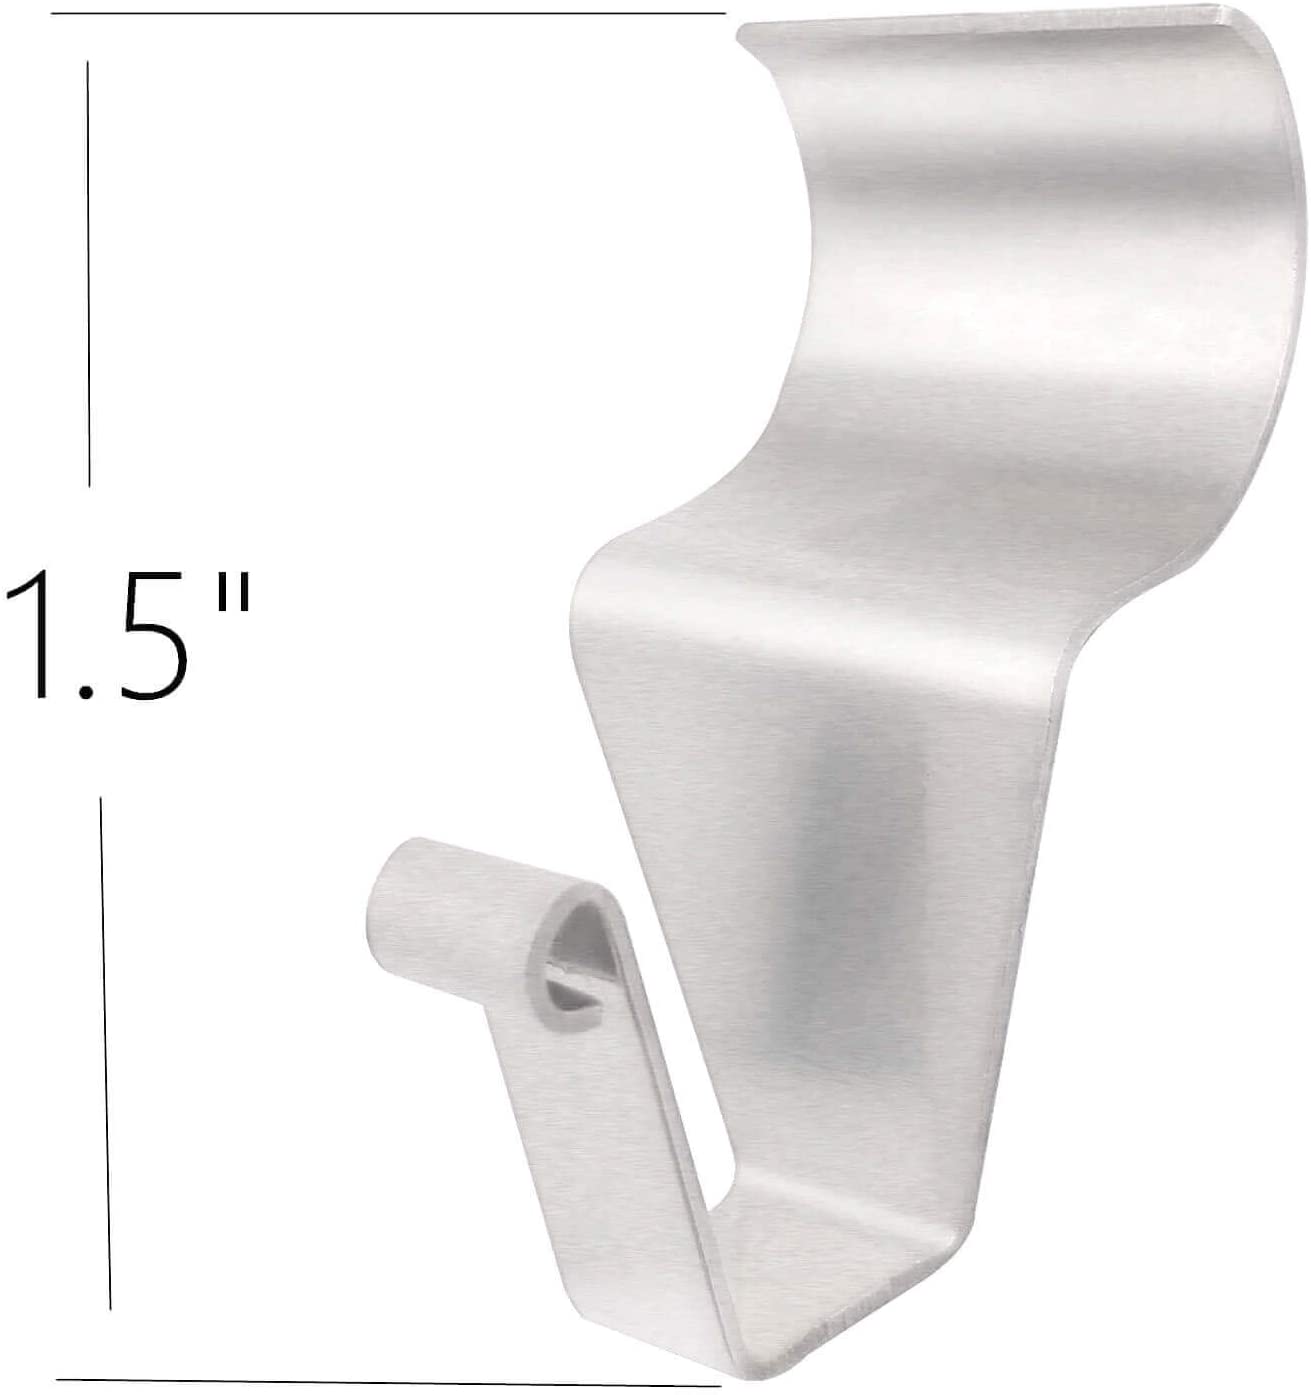 Vinyl Siding Hooks Hanger - 20 Pack Heavy Duty Stainless No-Hole Needed Vinyl Siding Clips for Hanging- Vinyl Siding Hooks for Outdoor Decorations (20) - image 3 of 7